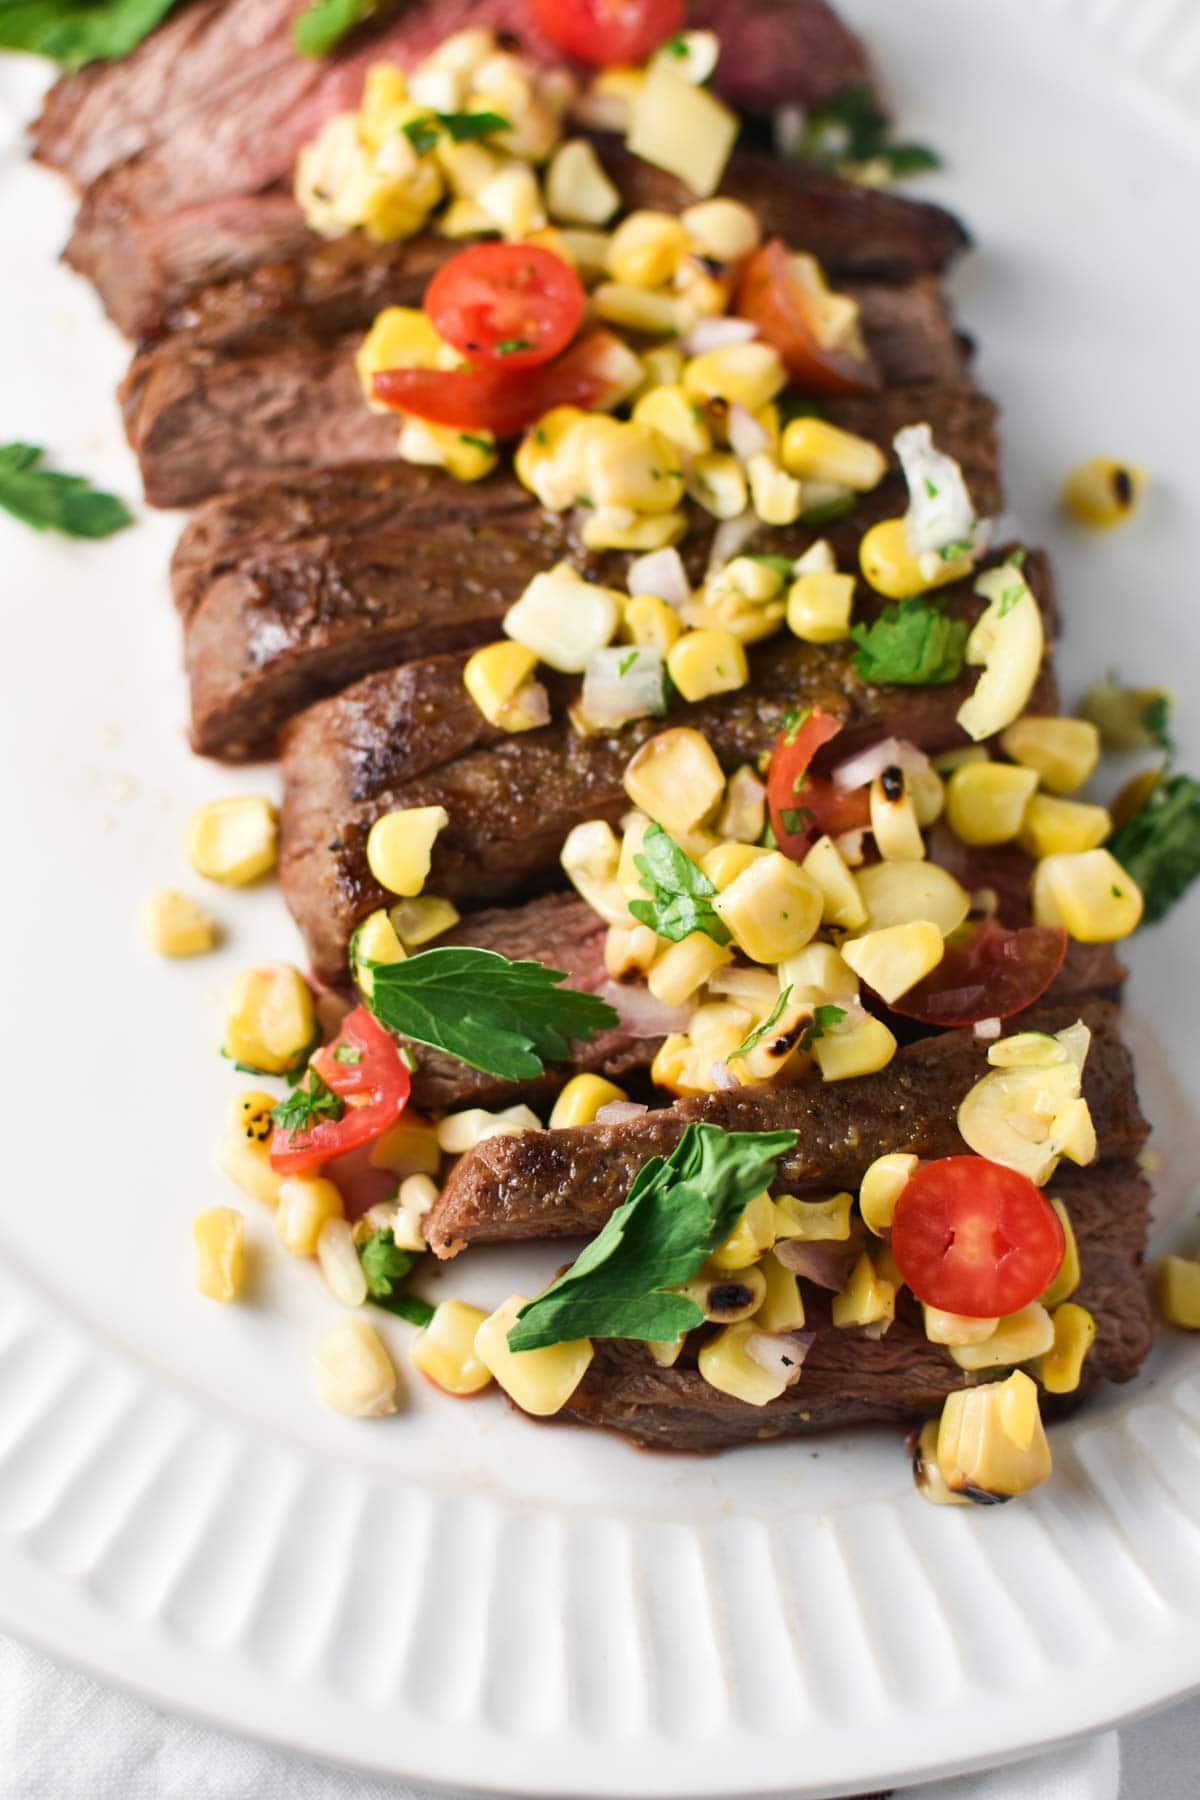 Sliced steak on a white plate topped with corn, tomatoes, and parsley